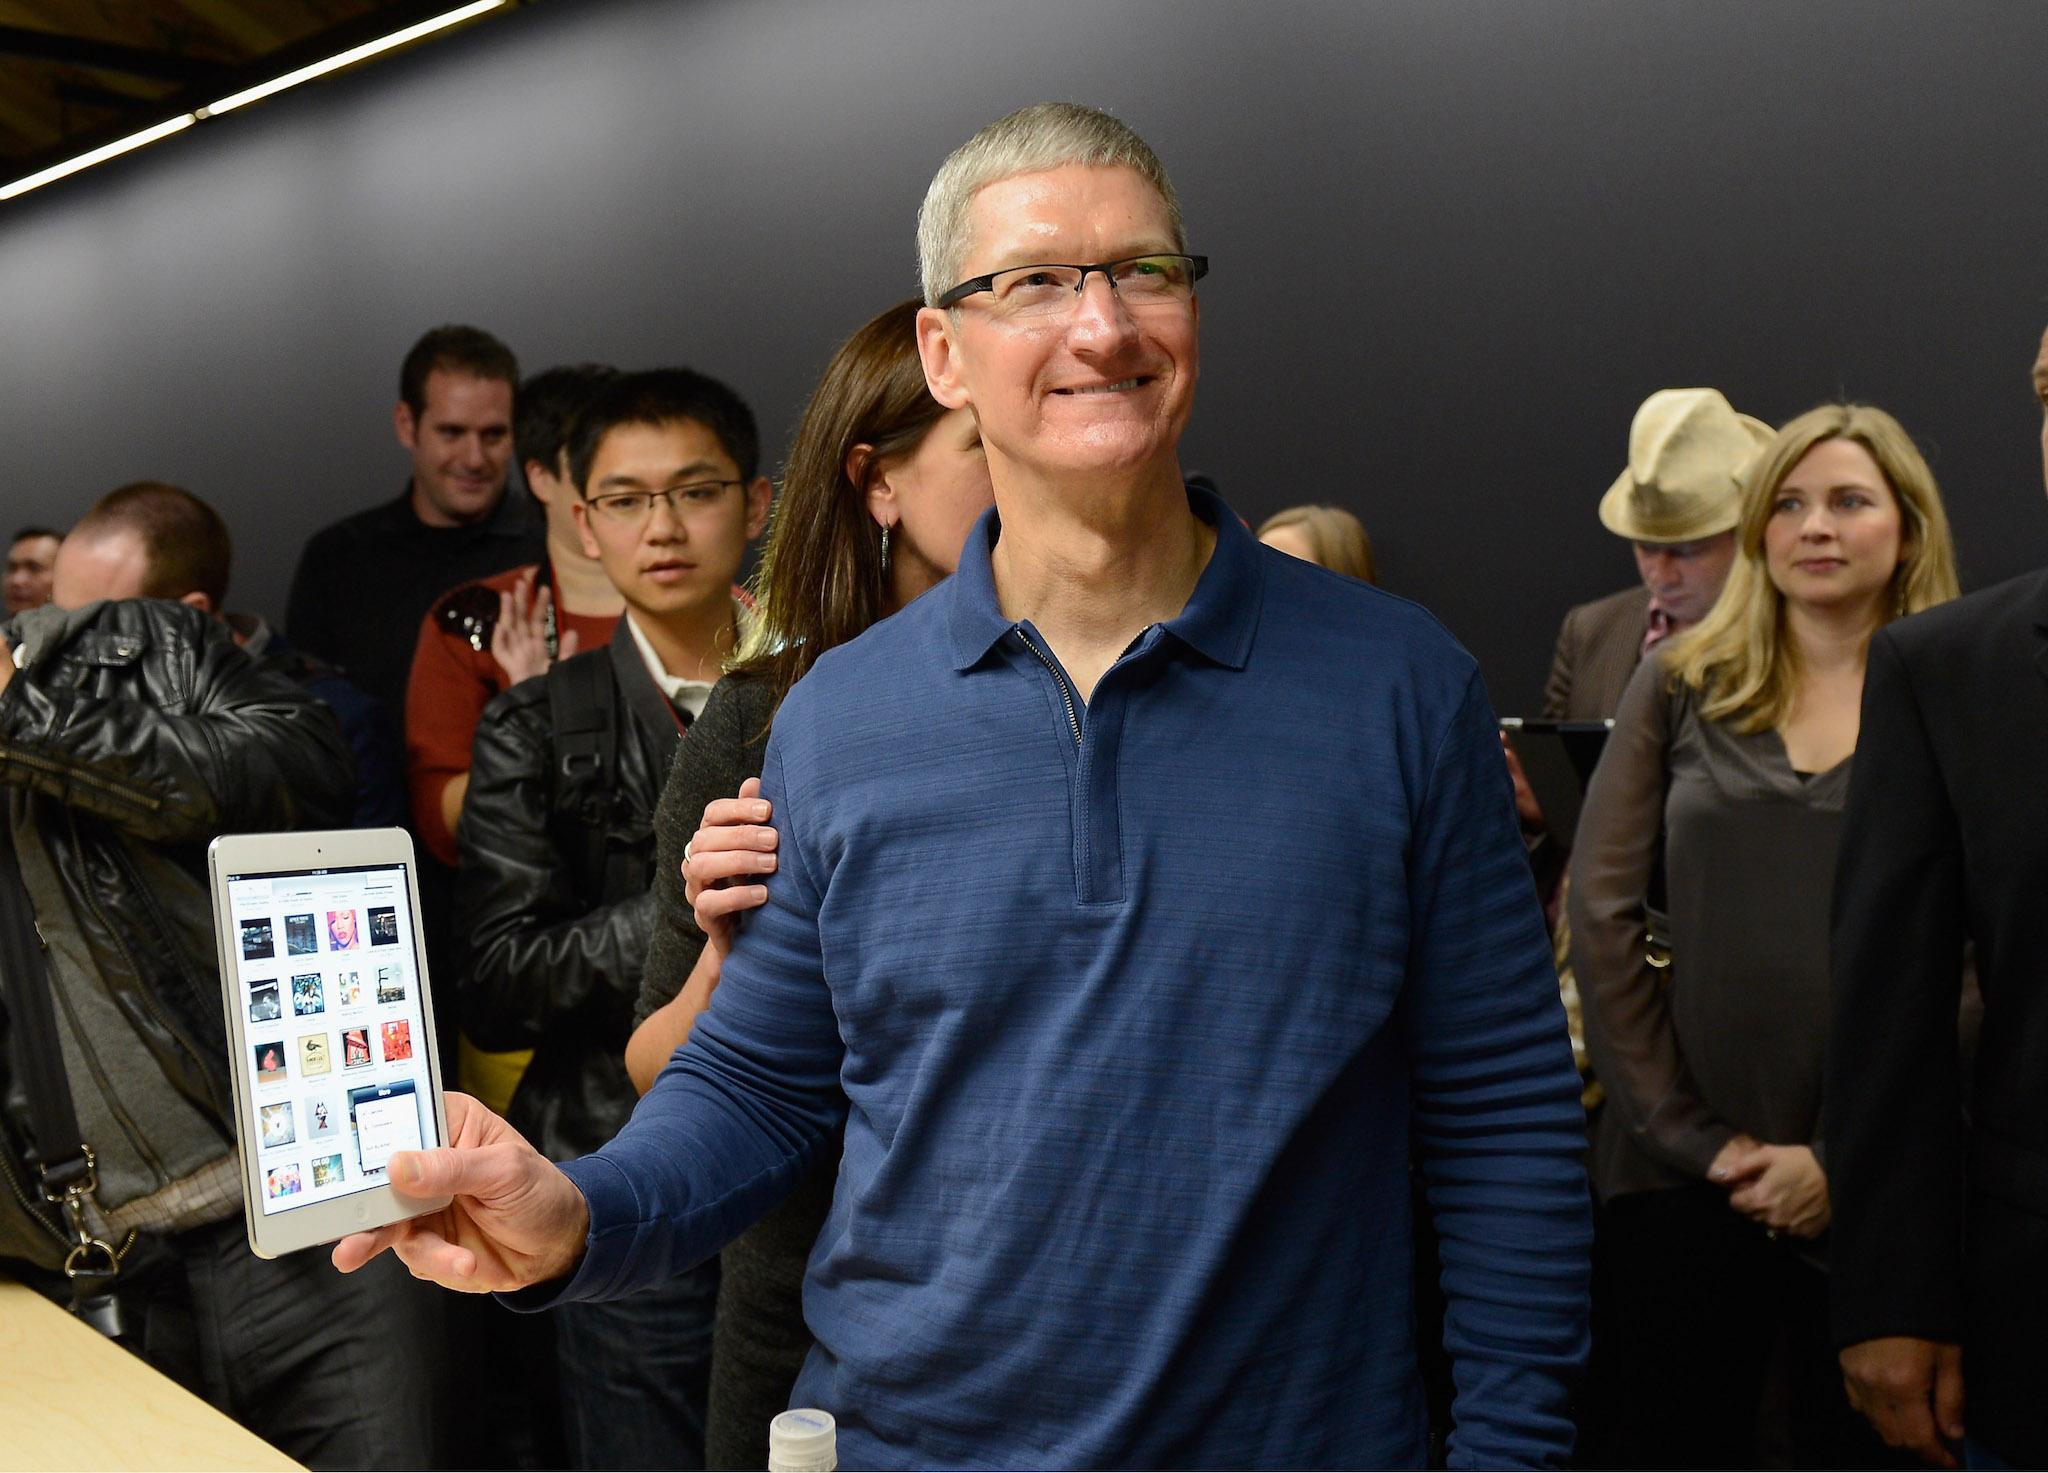 Apple CEO Tim Cook speaks displays the new iPad mini after it was unveiled